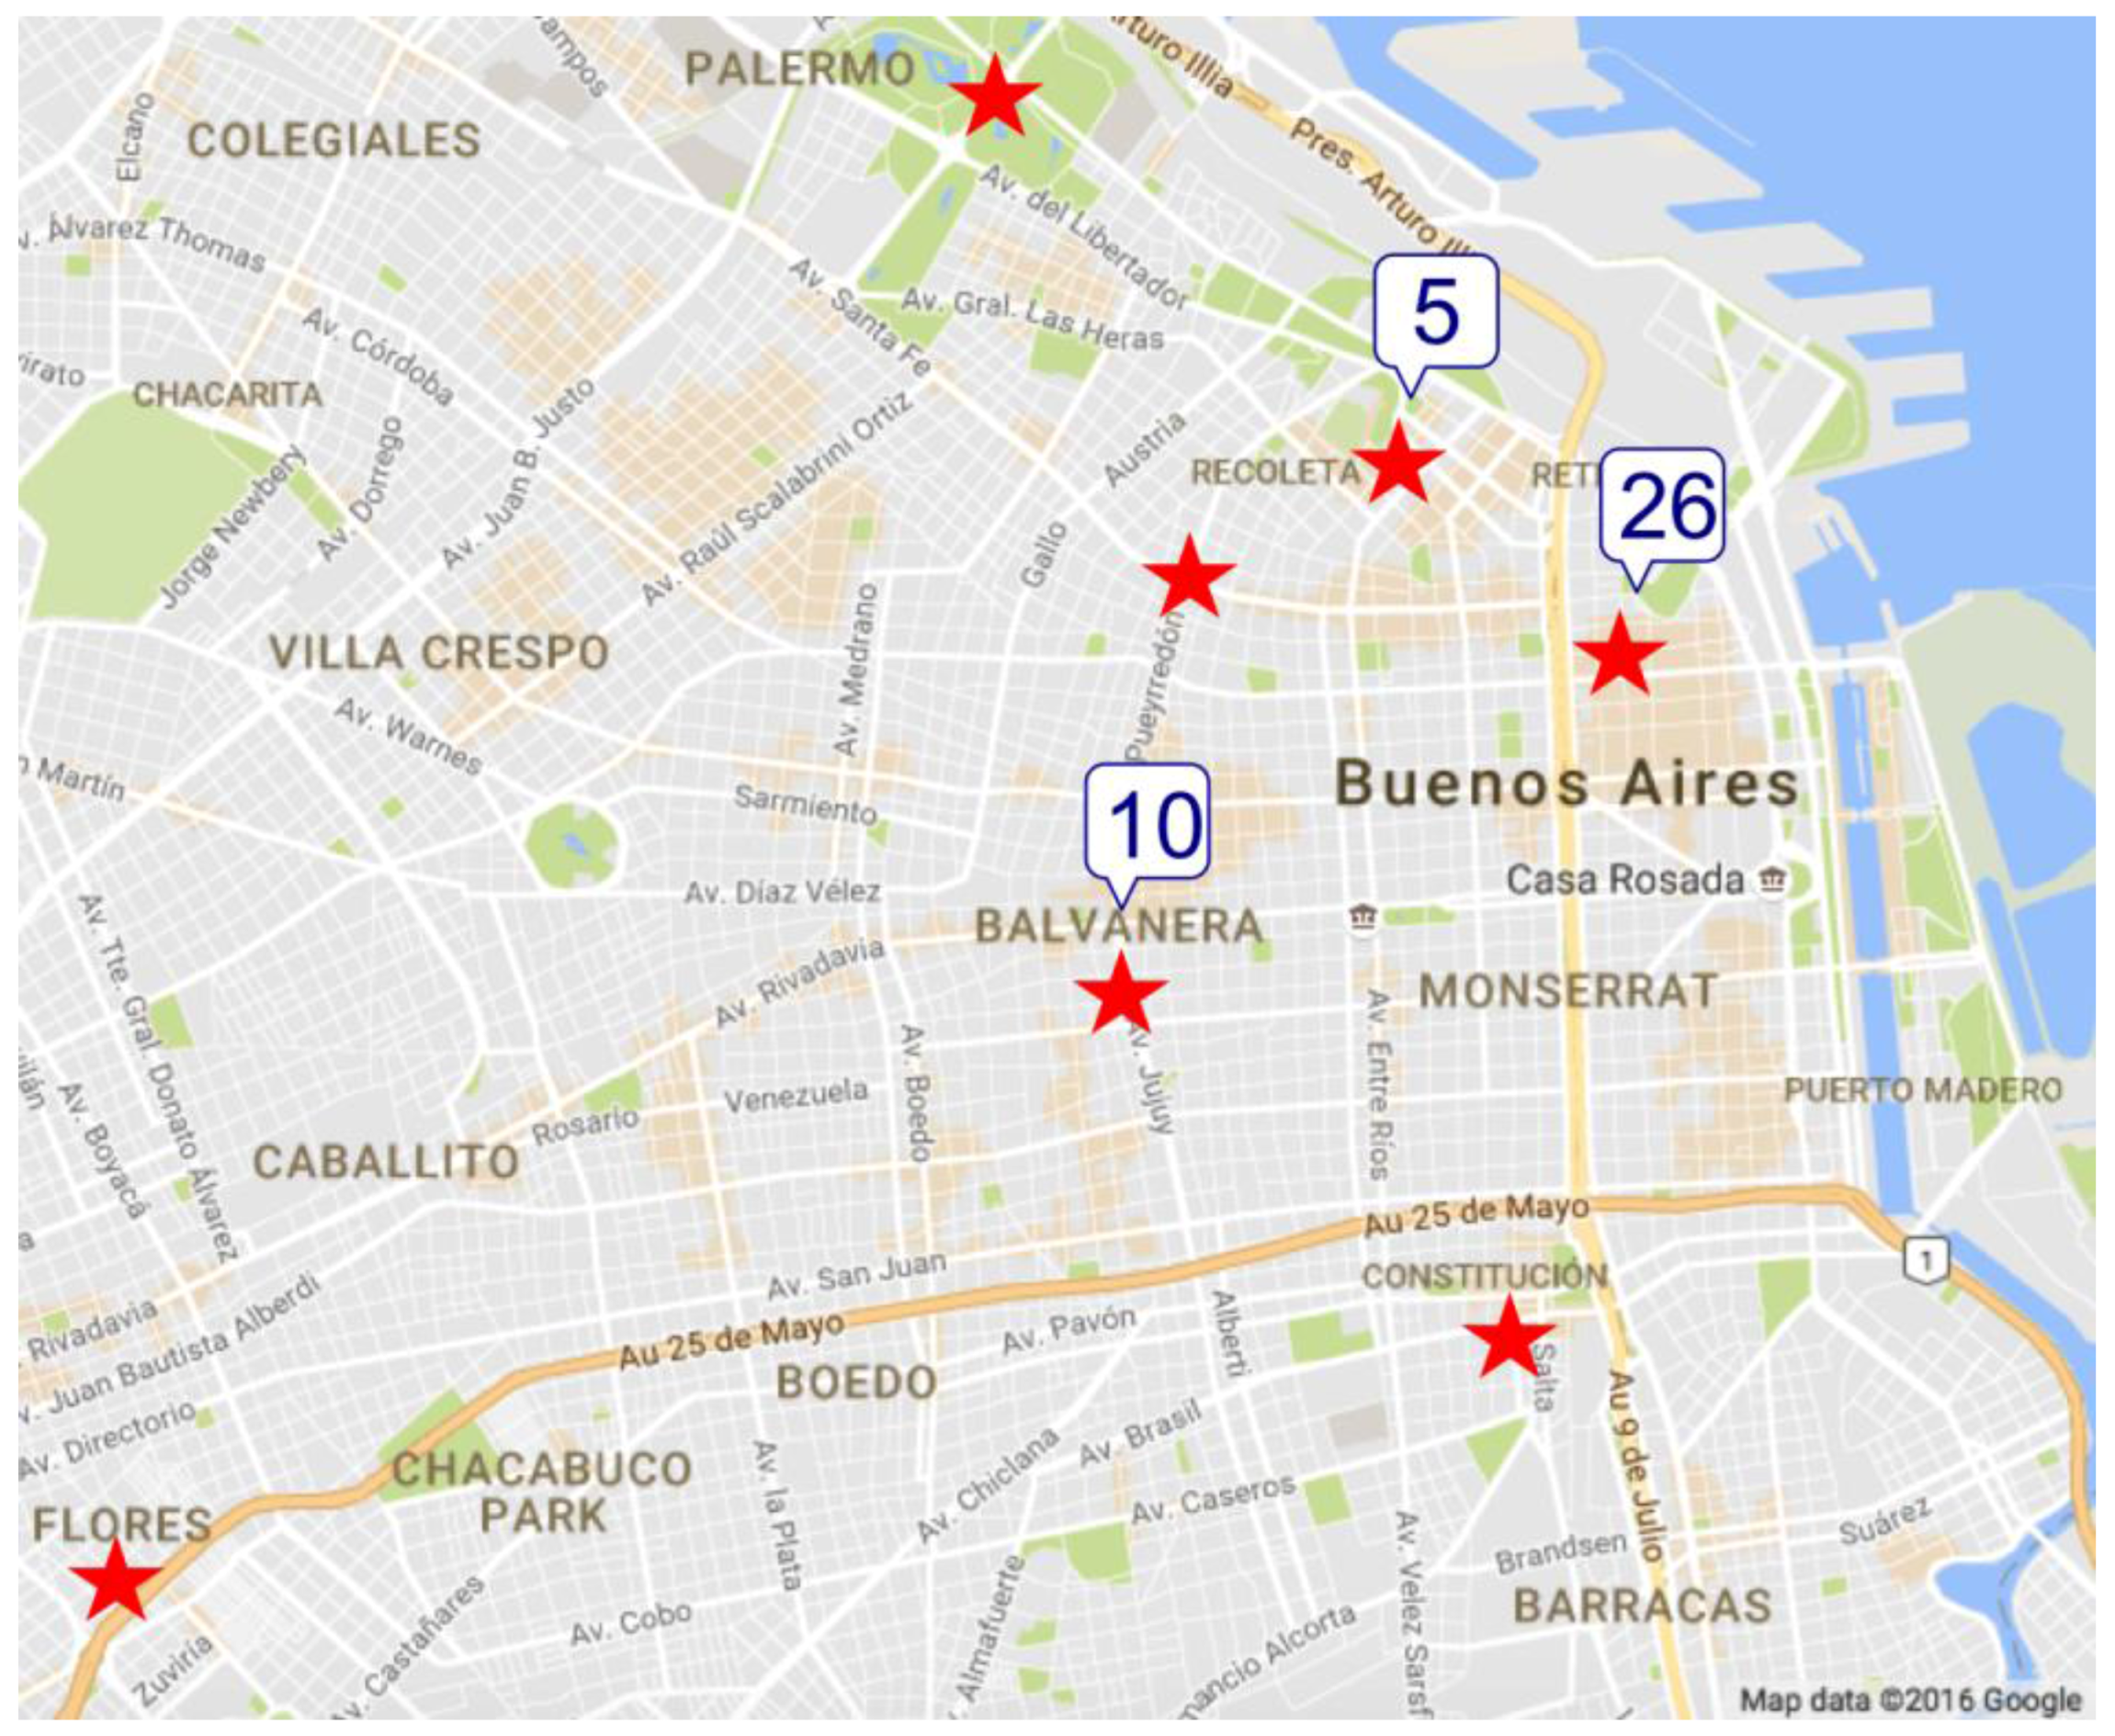 Big girls and sex in Buenos Aires